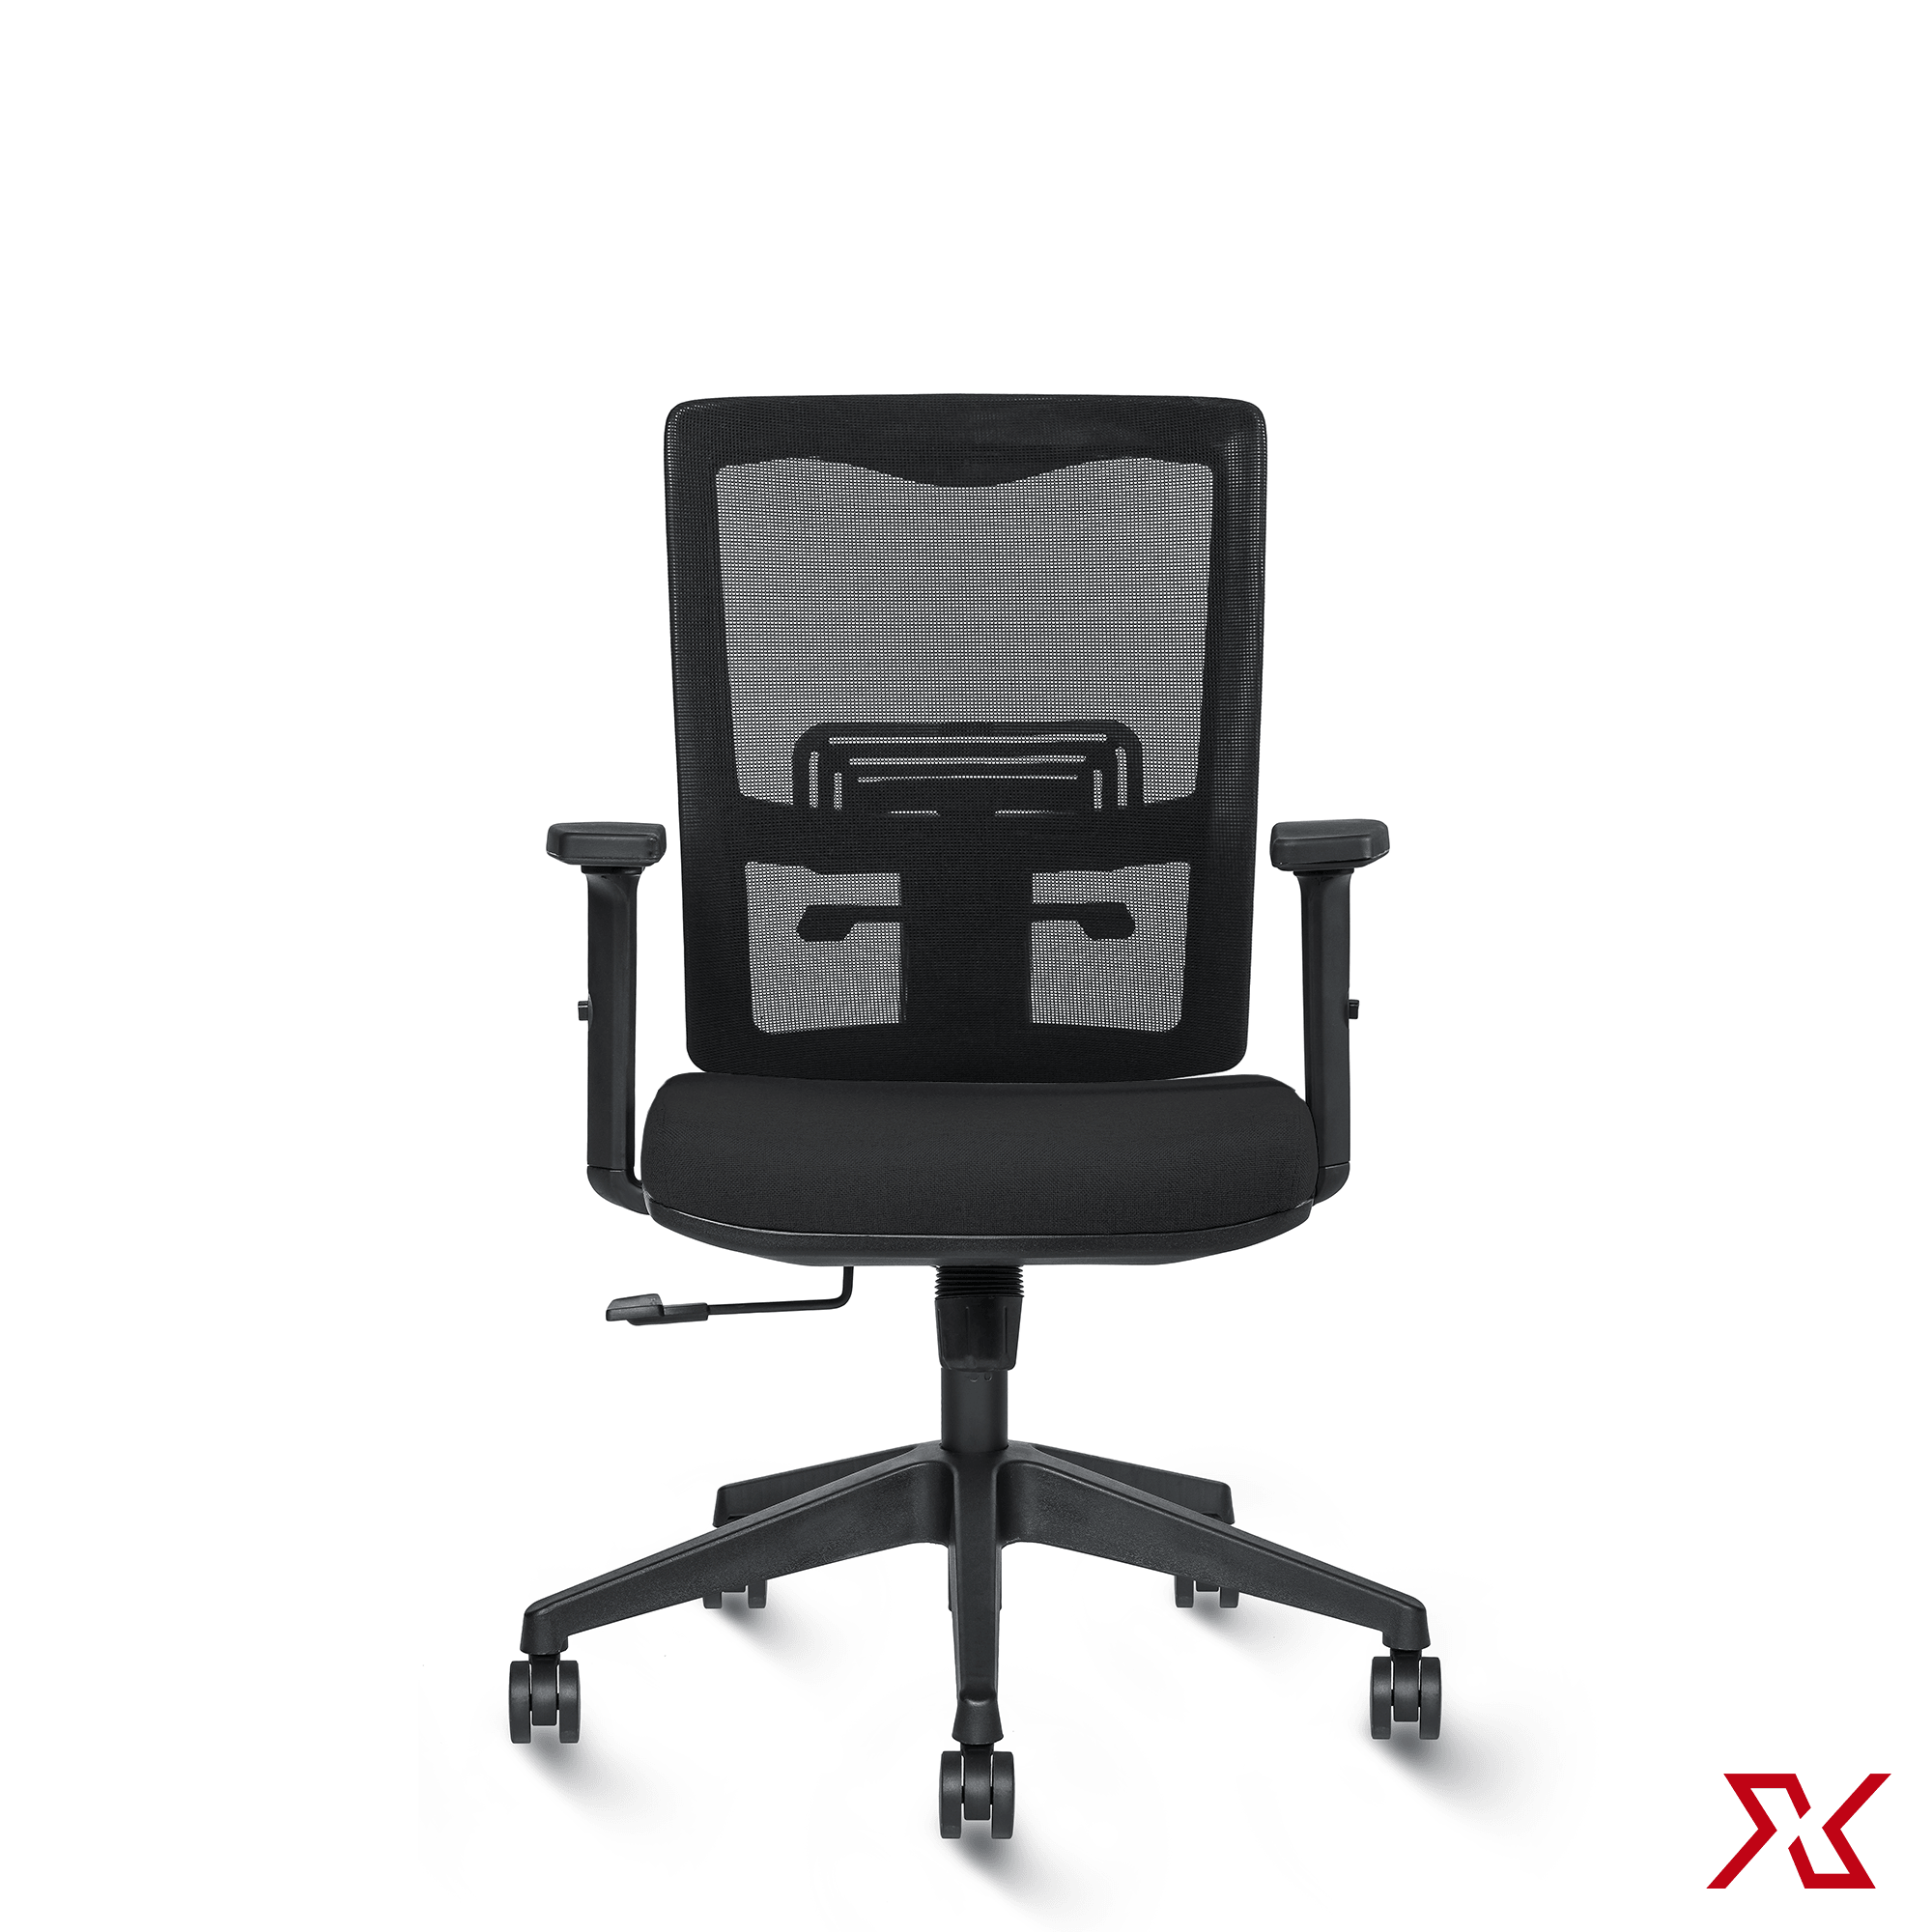 ZAP Medium Back LX (Black Chair) - Exclusiff Seating Sytems